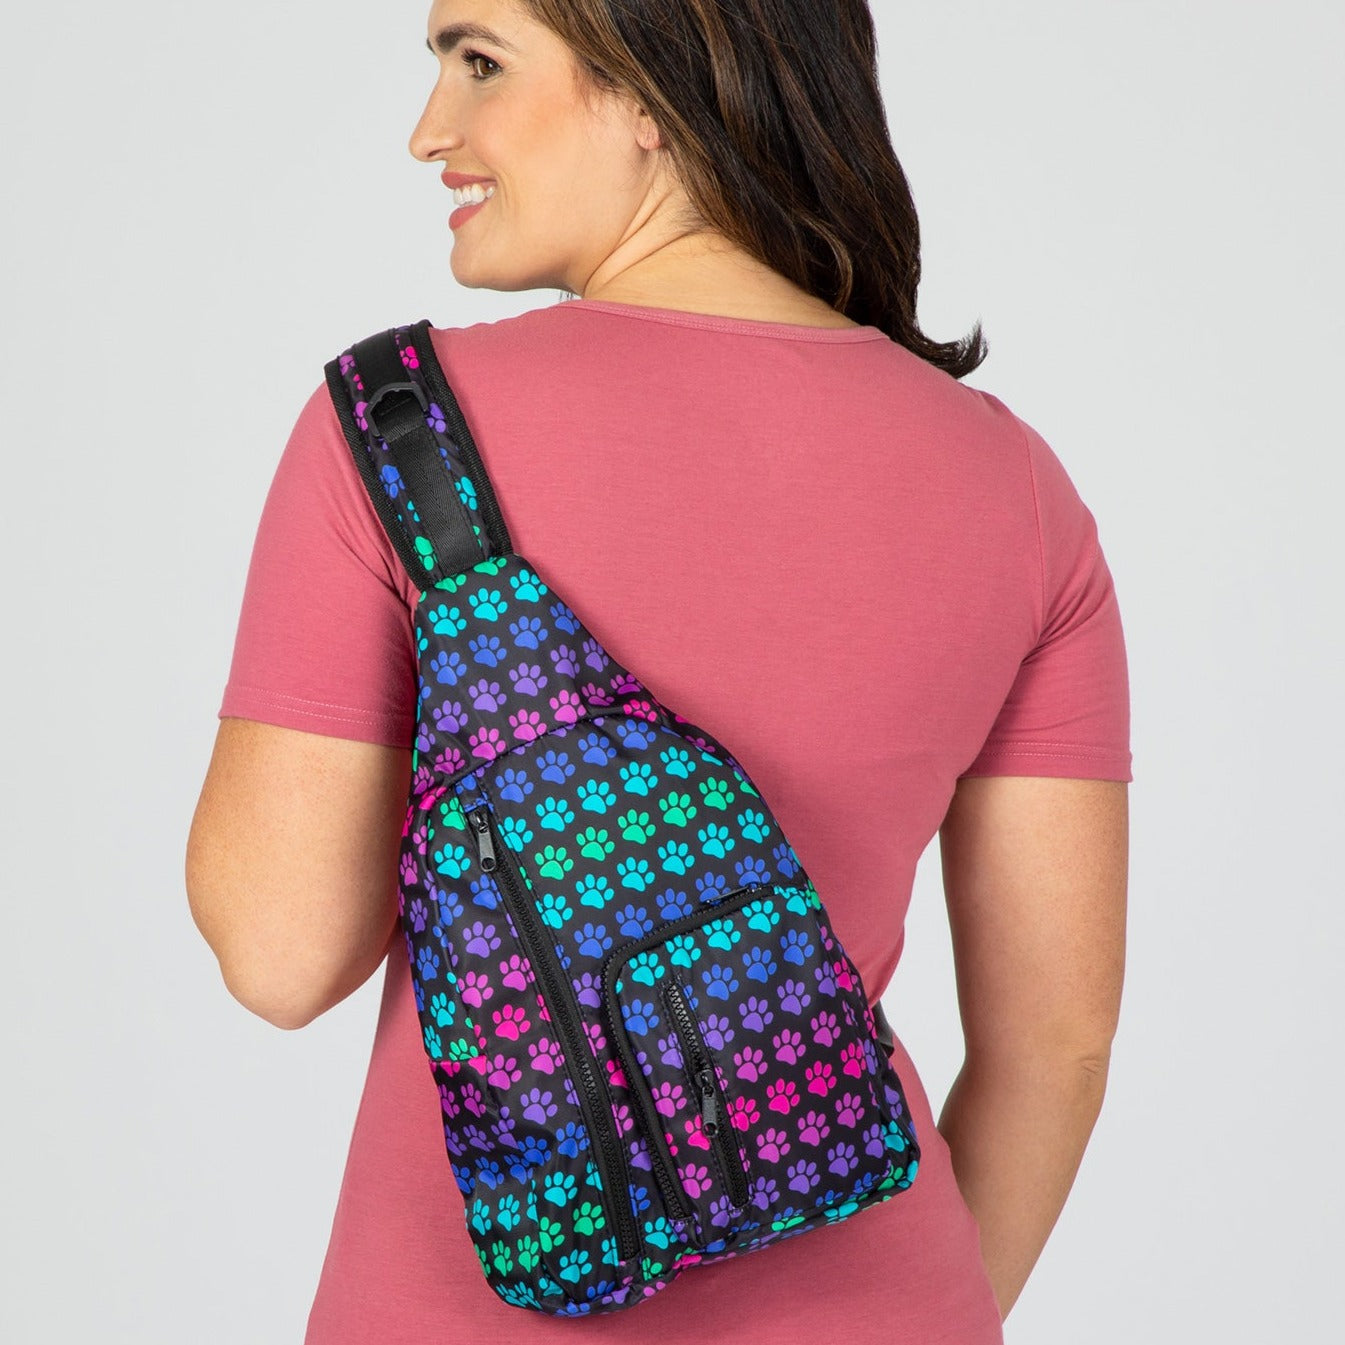 Paw Print Sling Backpack - Rainbow Paws